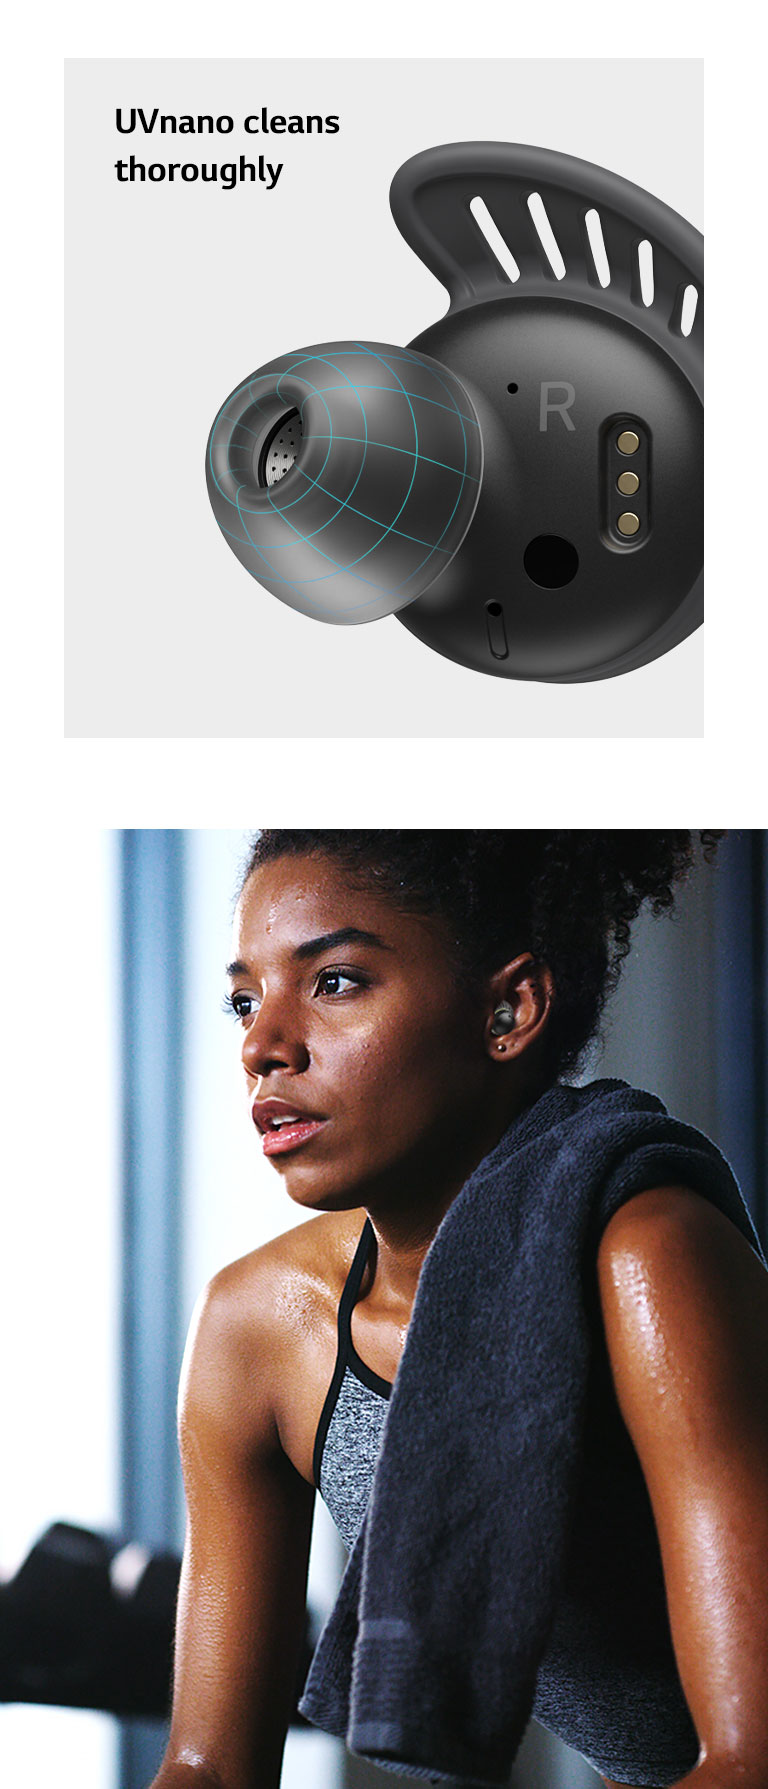 A close-up of the TONE Free fit earbud, with a blue grid on the eargel. Text says UVnano cleans thoroughly and 99.9% reduction in bacteria. A woman is sweating as she wears TONE Free fit, and it appears she just finished her workout.